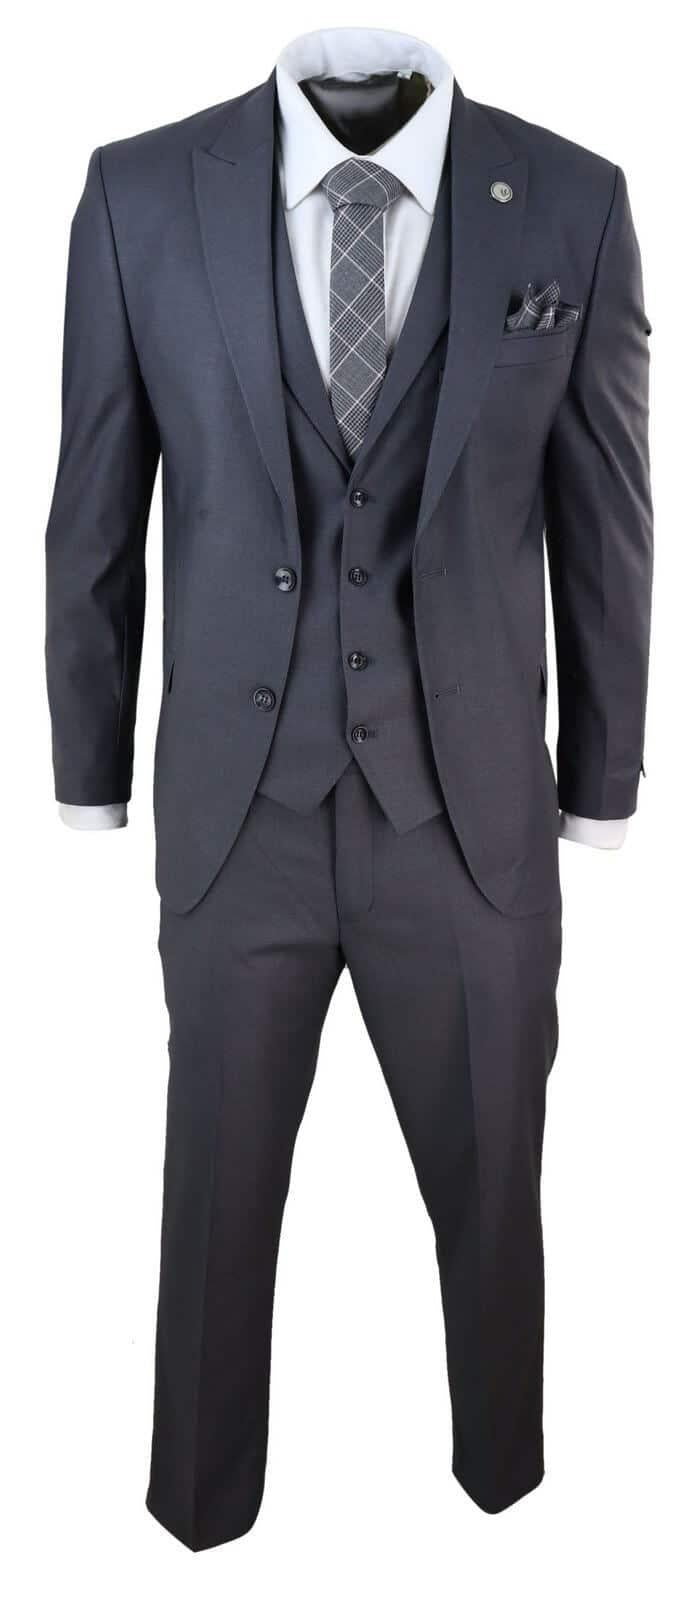 New Mens 3 Piece Suit Plain charcoal Classic Tailored Fit Smart Casual 1920s Formal - Upperclass Fashions 